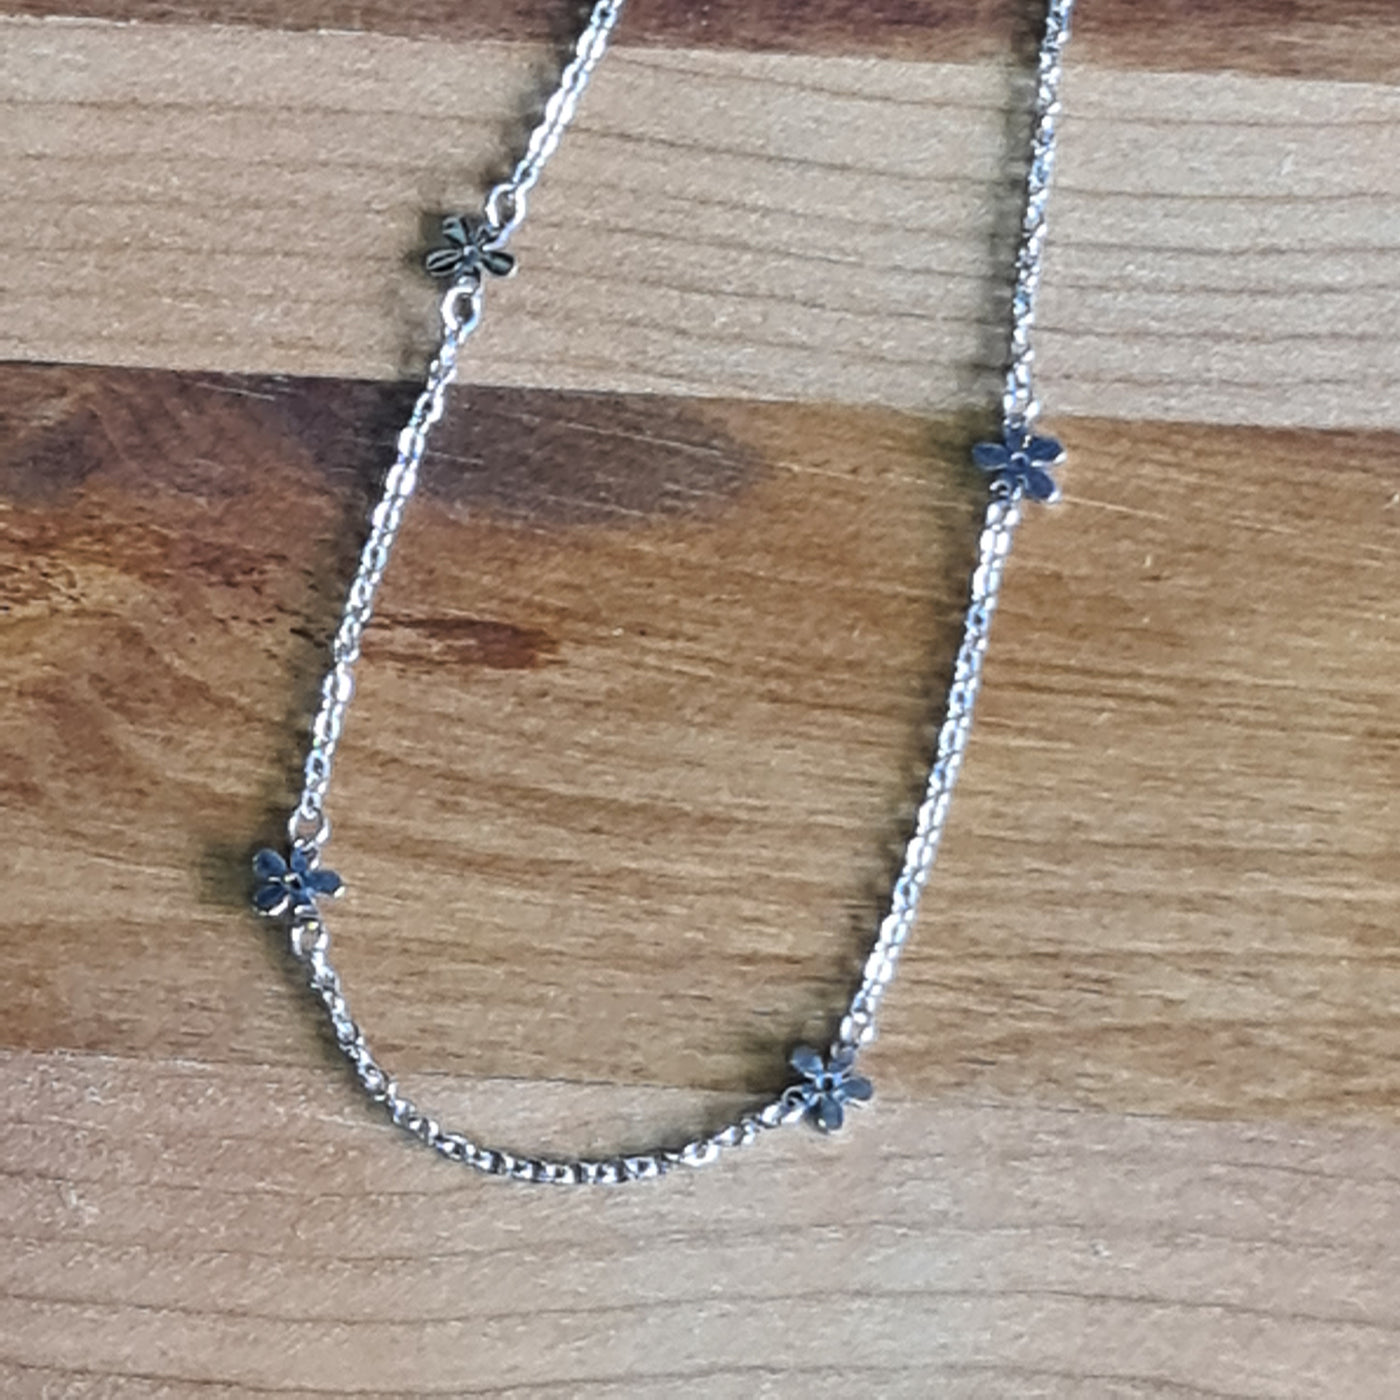 SOME Necklace Stainless Steal Daisy Chain